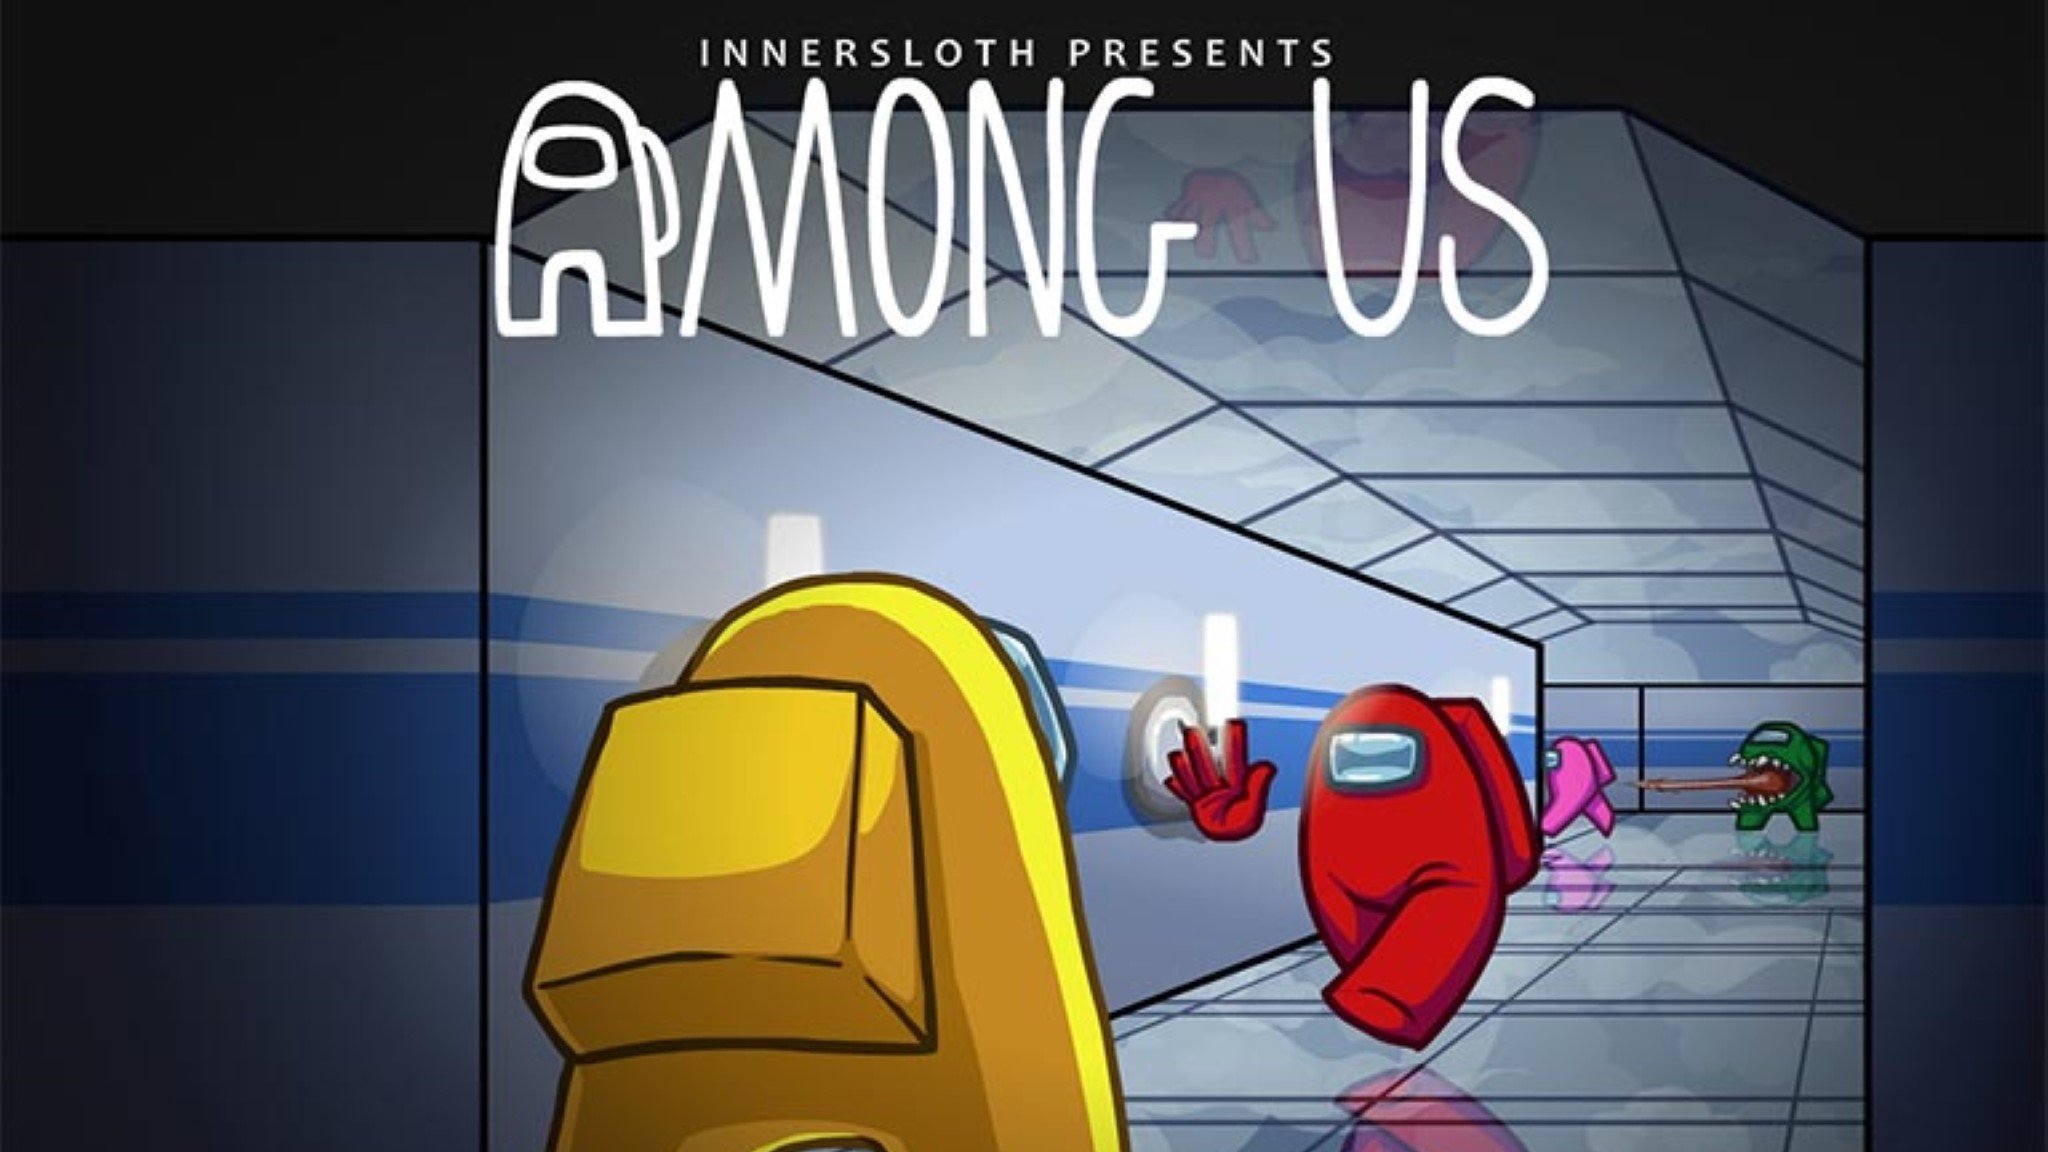 Among Us VR' could release this December according to Steam data